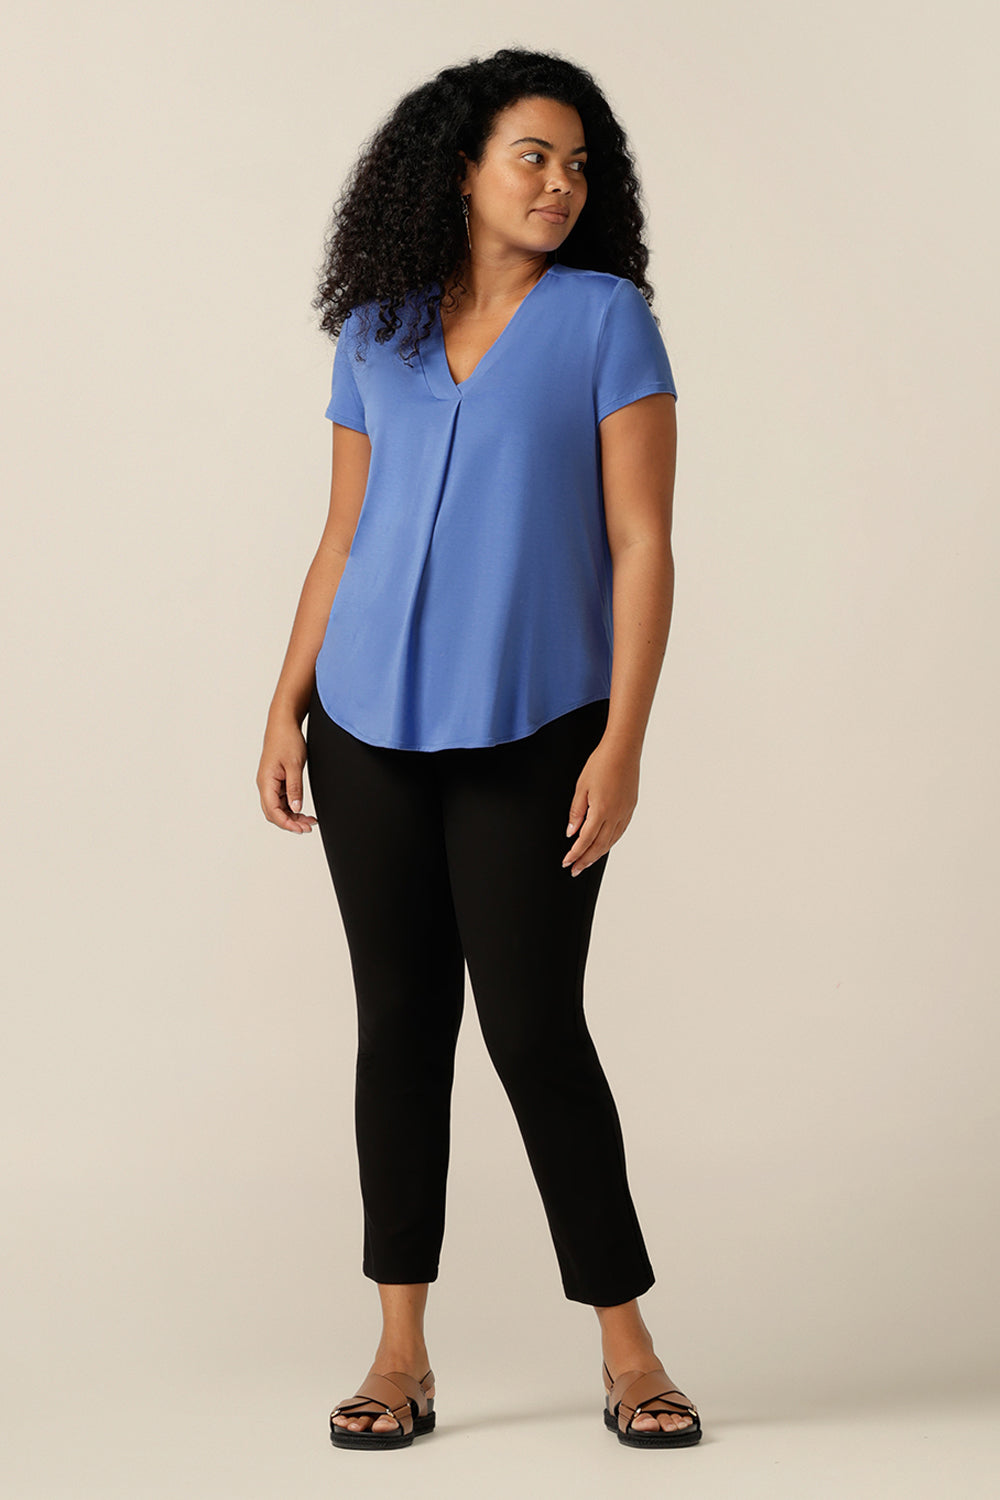 A curvy size 12 woman wears a blue bamboo jersey top. The top has short sleeves and a V-neckline. Worn with slim leg, cropped black trousers, this bamboo jersey top can be worn as a comfortable work wear top or as a casual top. Made in Australis and in natural, sustainable fibres, this bamboo jersey top is helping L&F work towards more sustainable and eco-conscious fashion. 